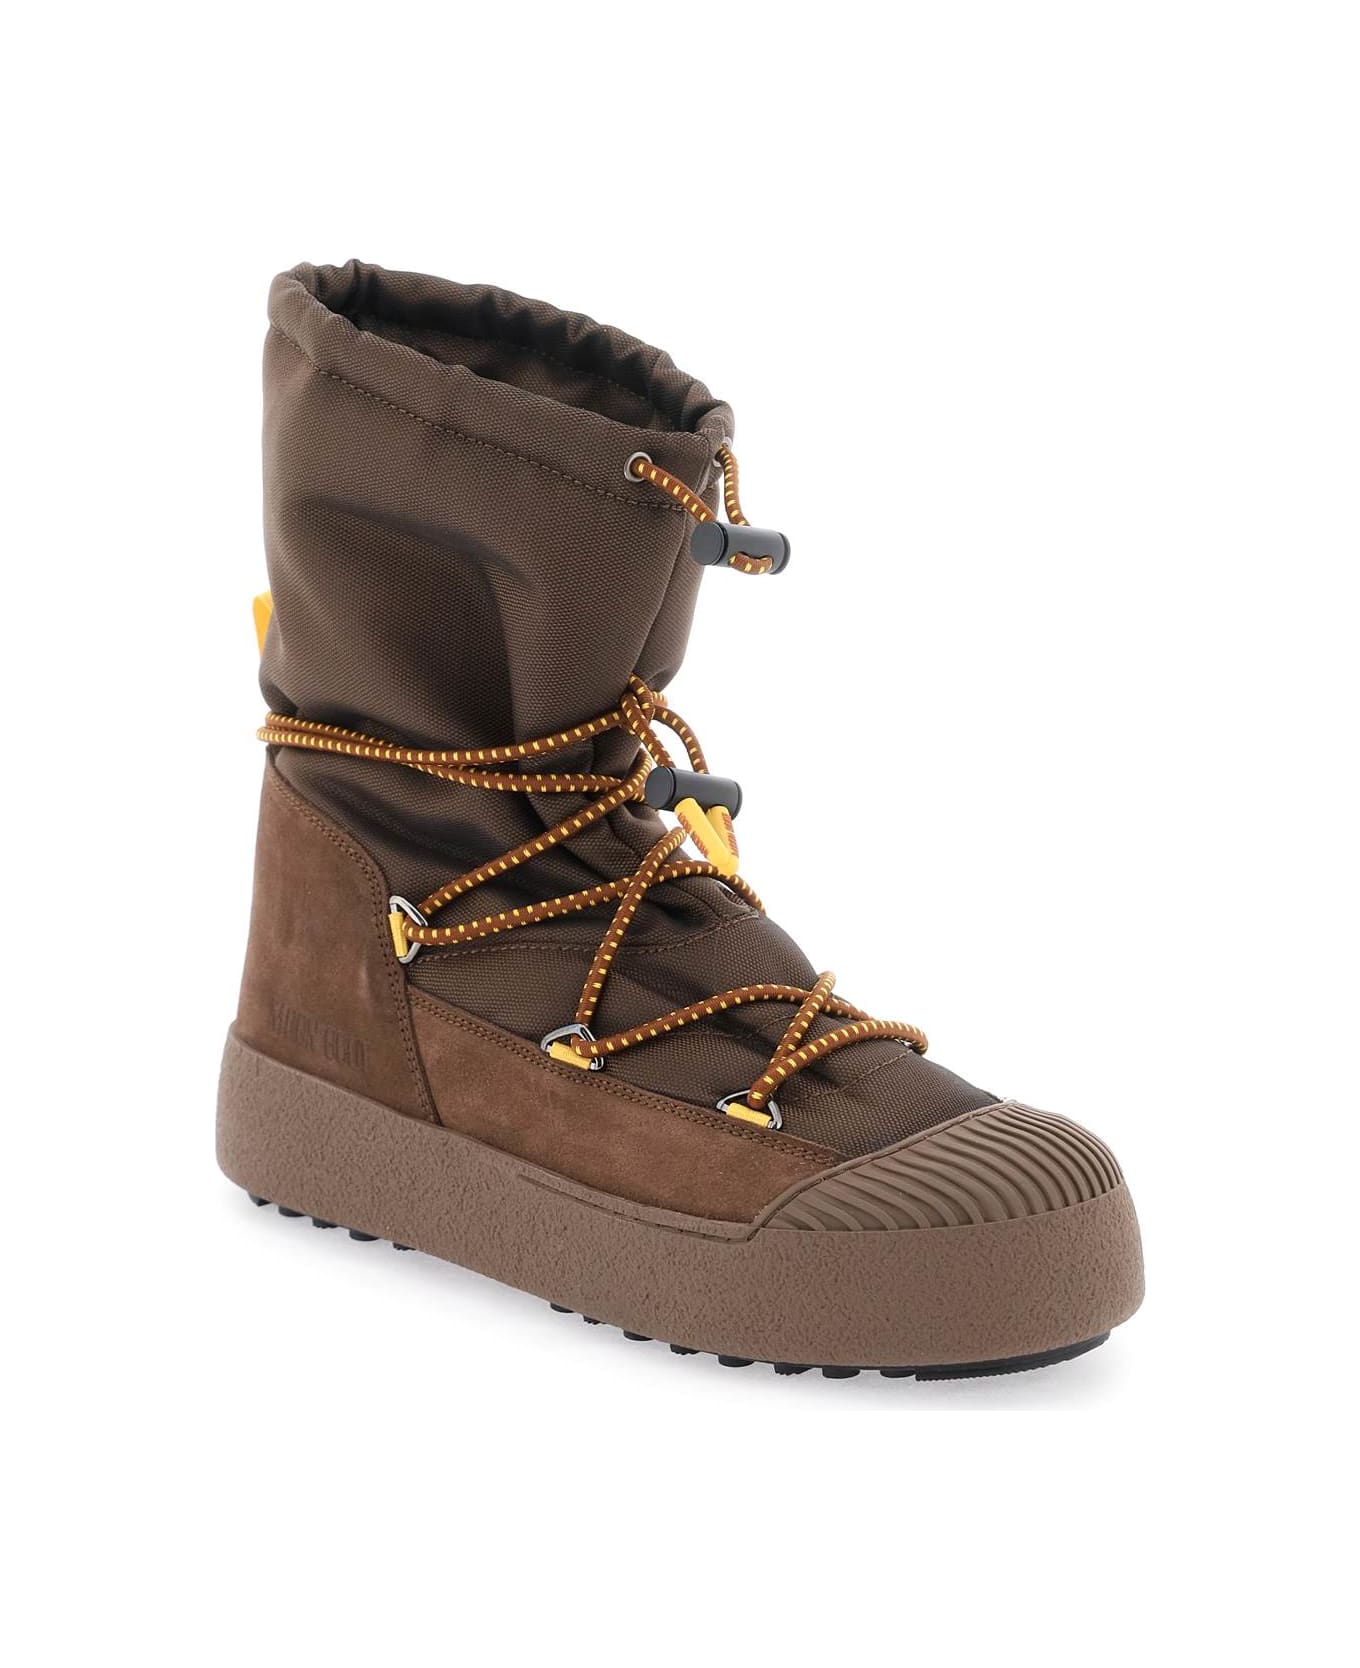 Moon Boot Mtrack Polar Boots - BROWN (Brown) ブーツ